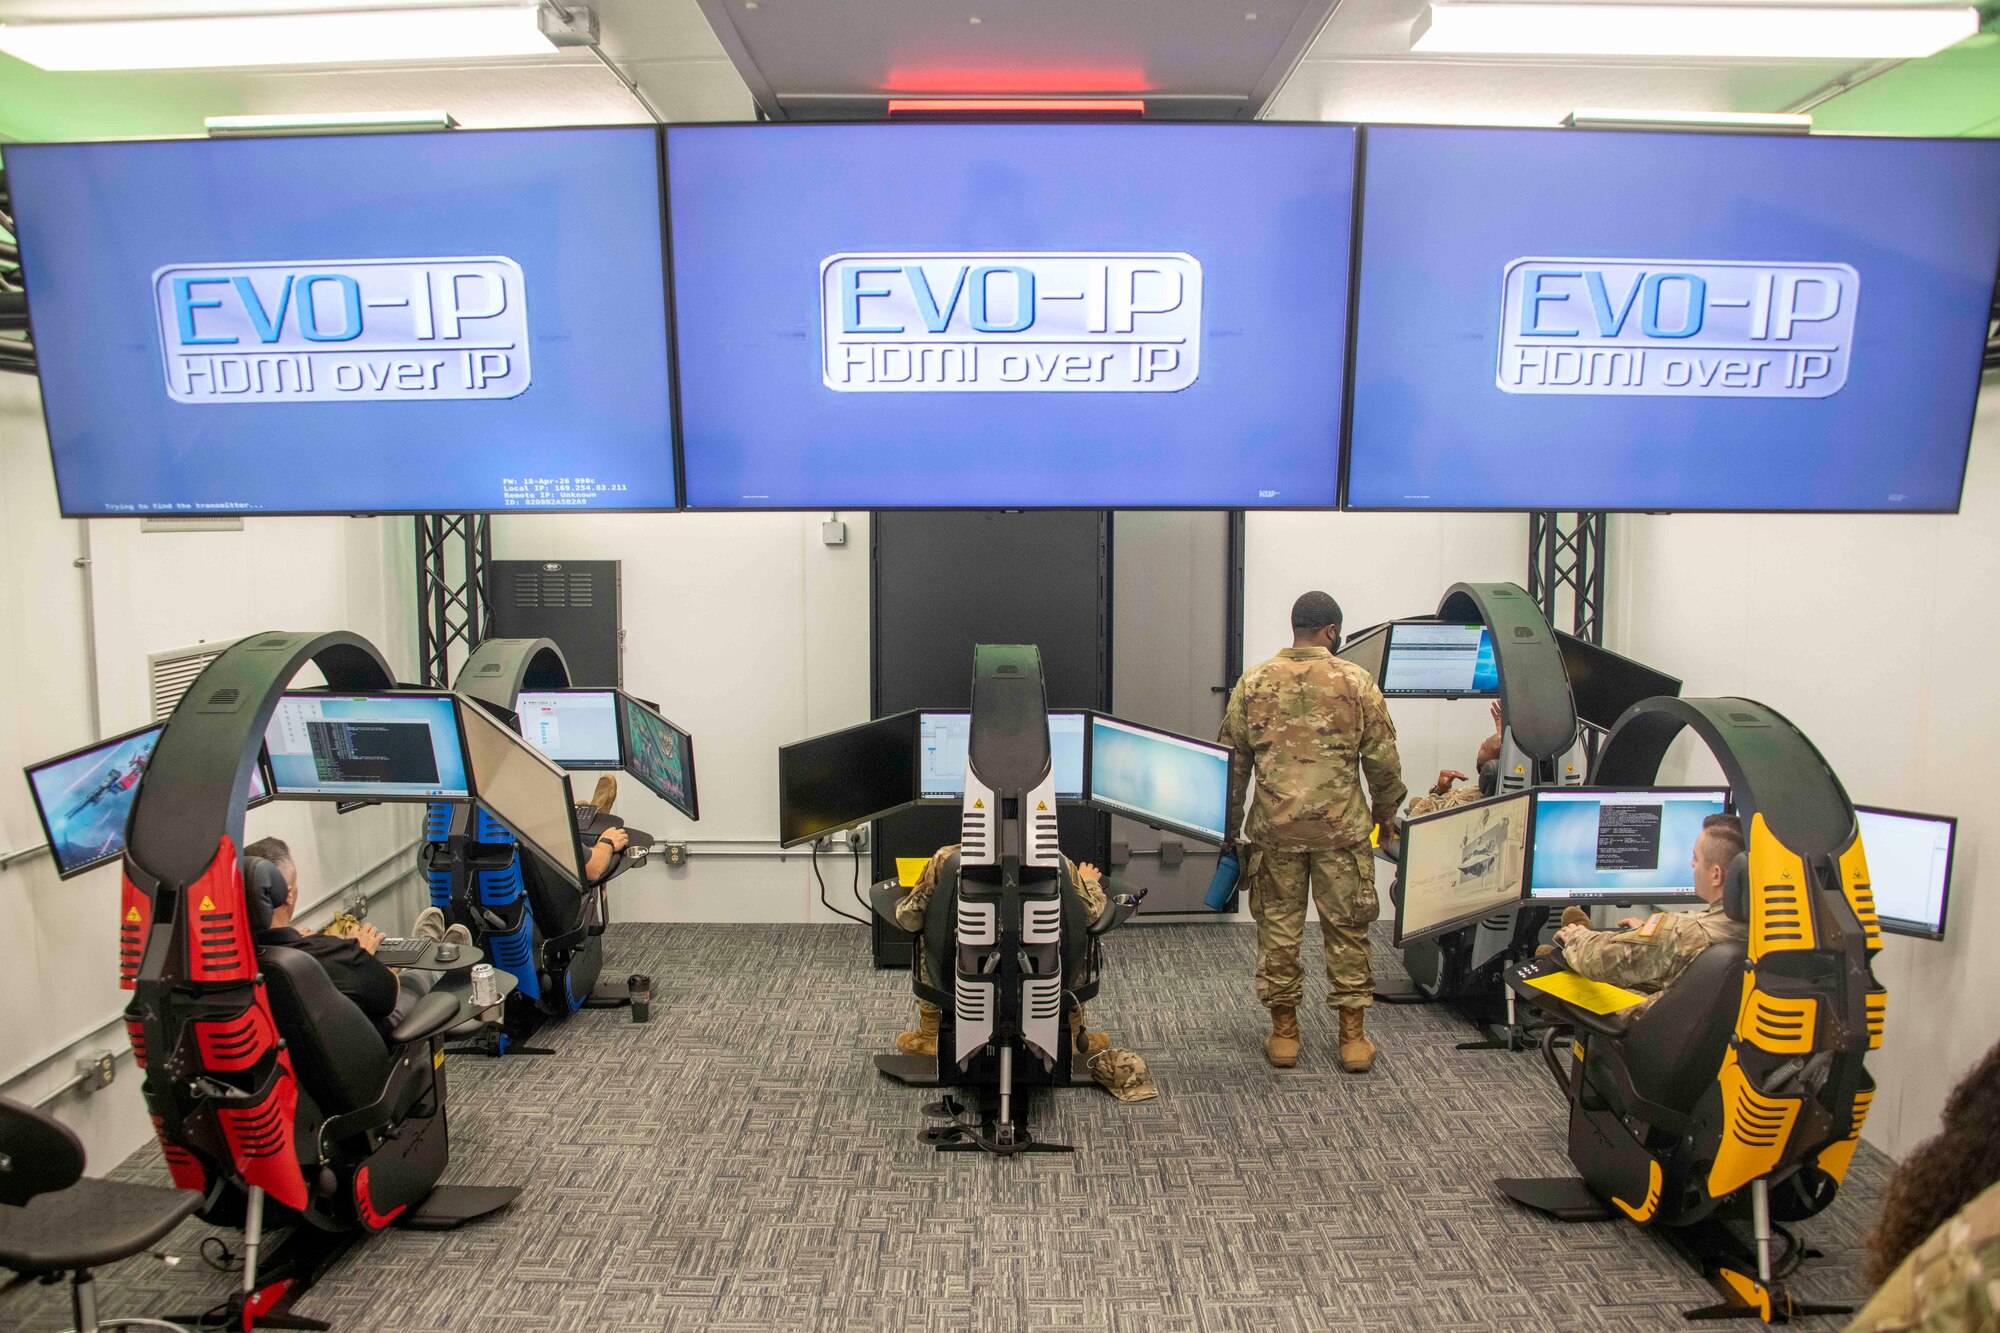 Members of the 97th Communications Squadron Mission Defense Team (MDT) prepare themselves in their range for their first cyber defense exercise at Altus Air Force Base, Oklahoma, Sept. 30, 2021. This exercise was made possible by the local finished range, which is comprised of five high-performance computer stations capable of running multiple cyber defense scripts at once. (U.S. Air Force photo by Staff Sgt. Cody Dowell)